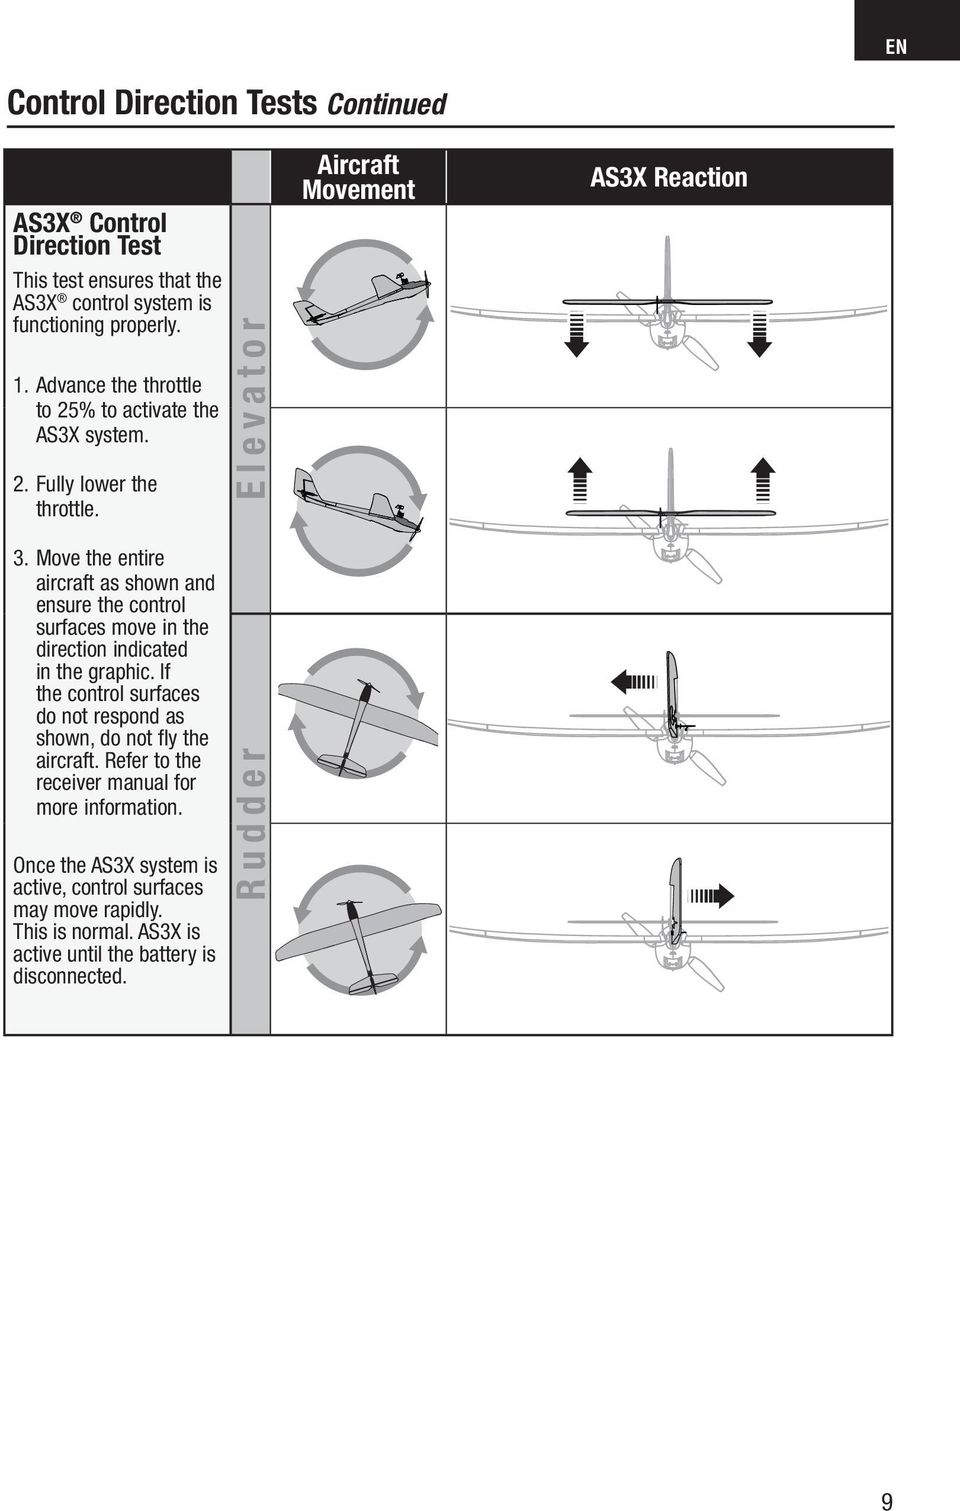 Move the entire aircraft as shown and ensure the control surfaces move in the direction indicated in the graphic.